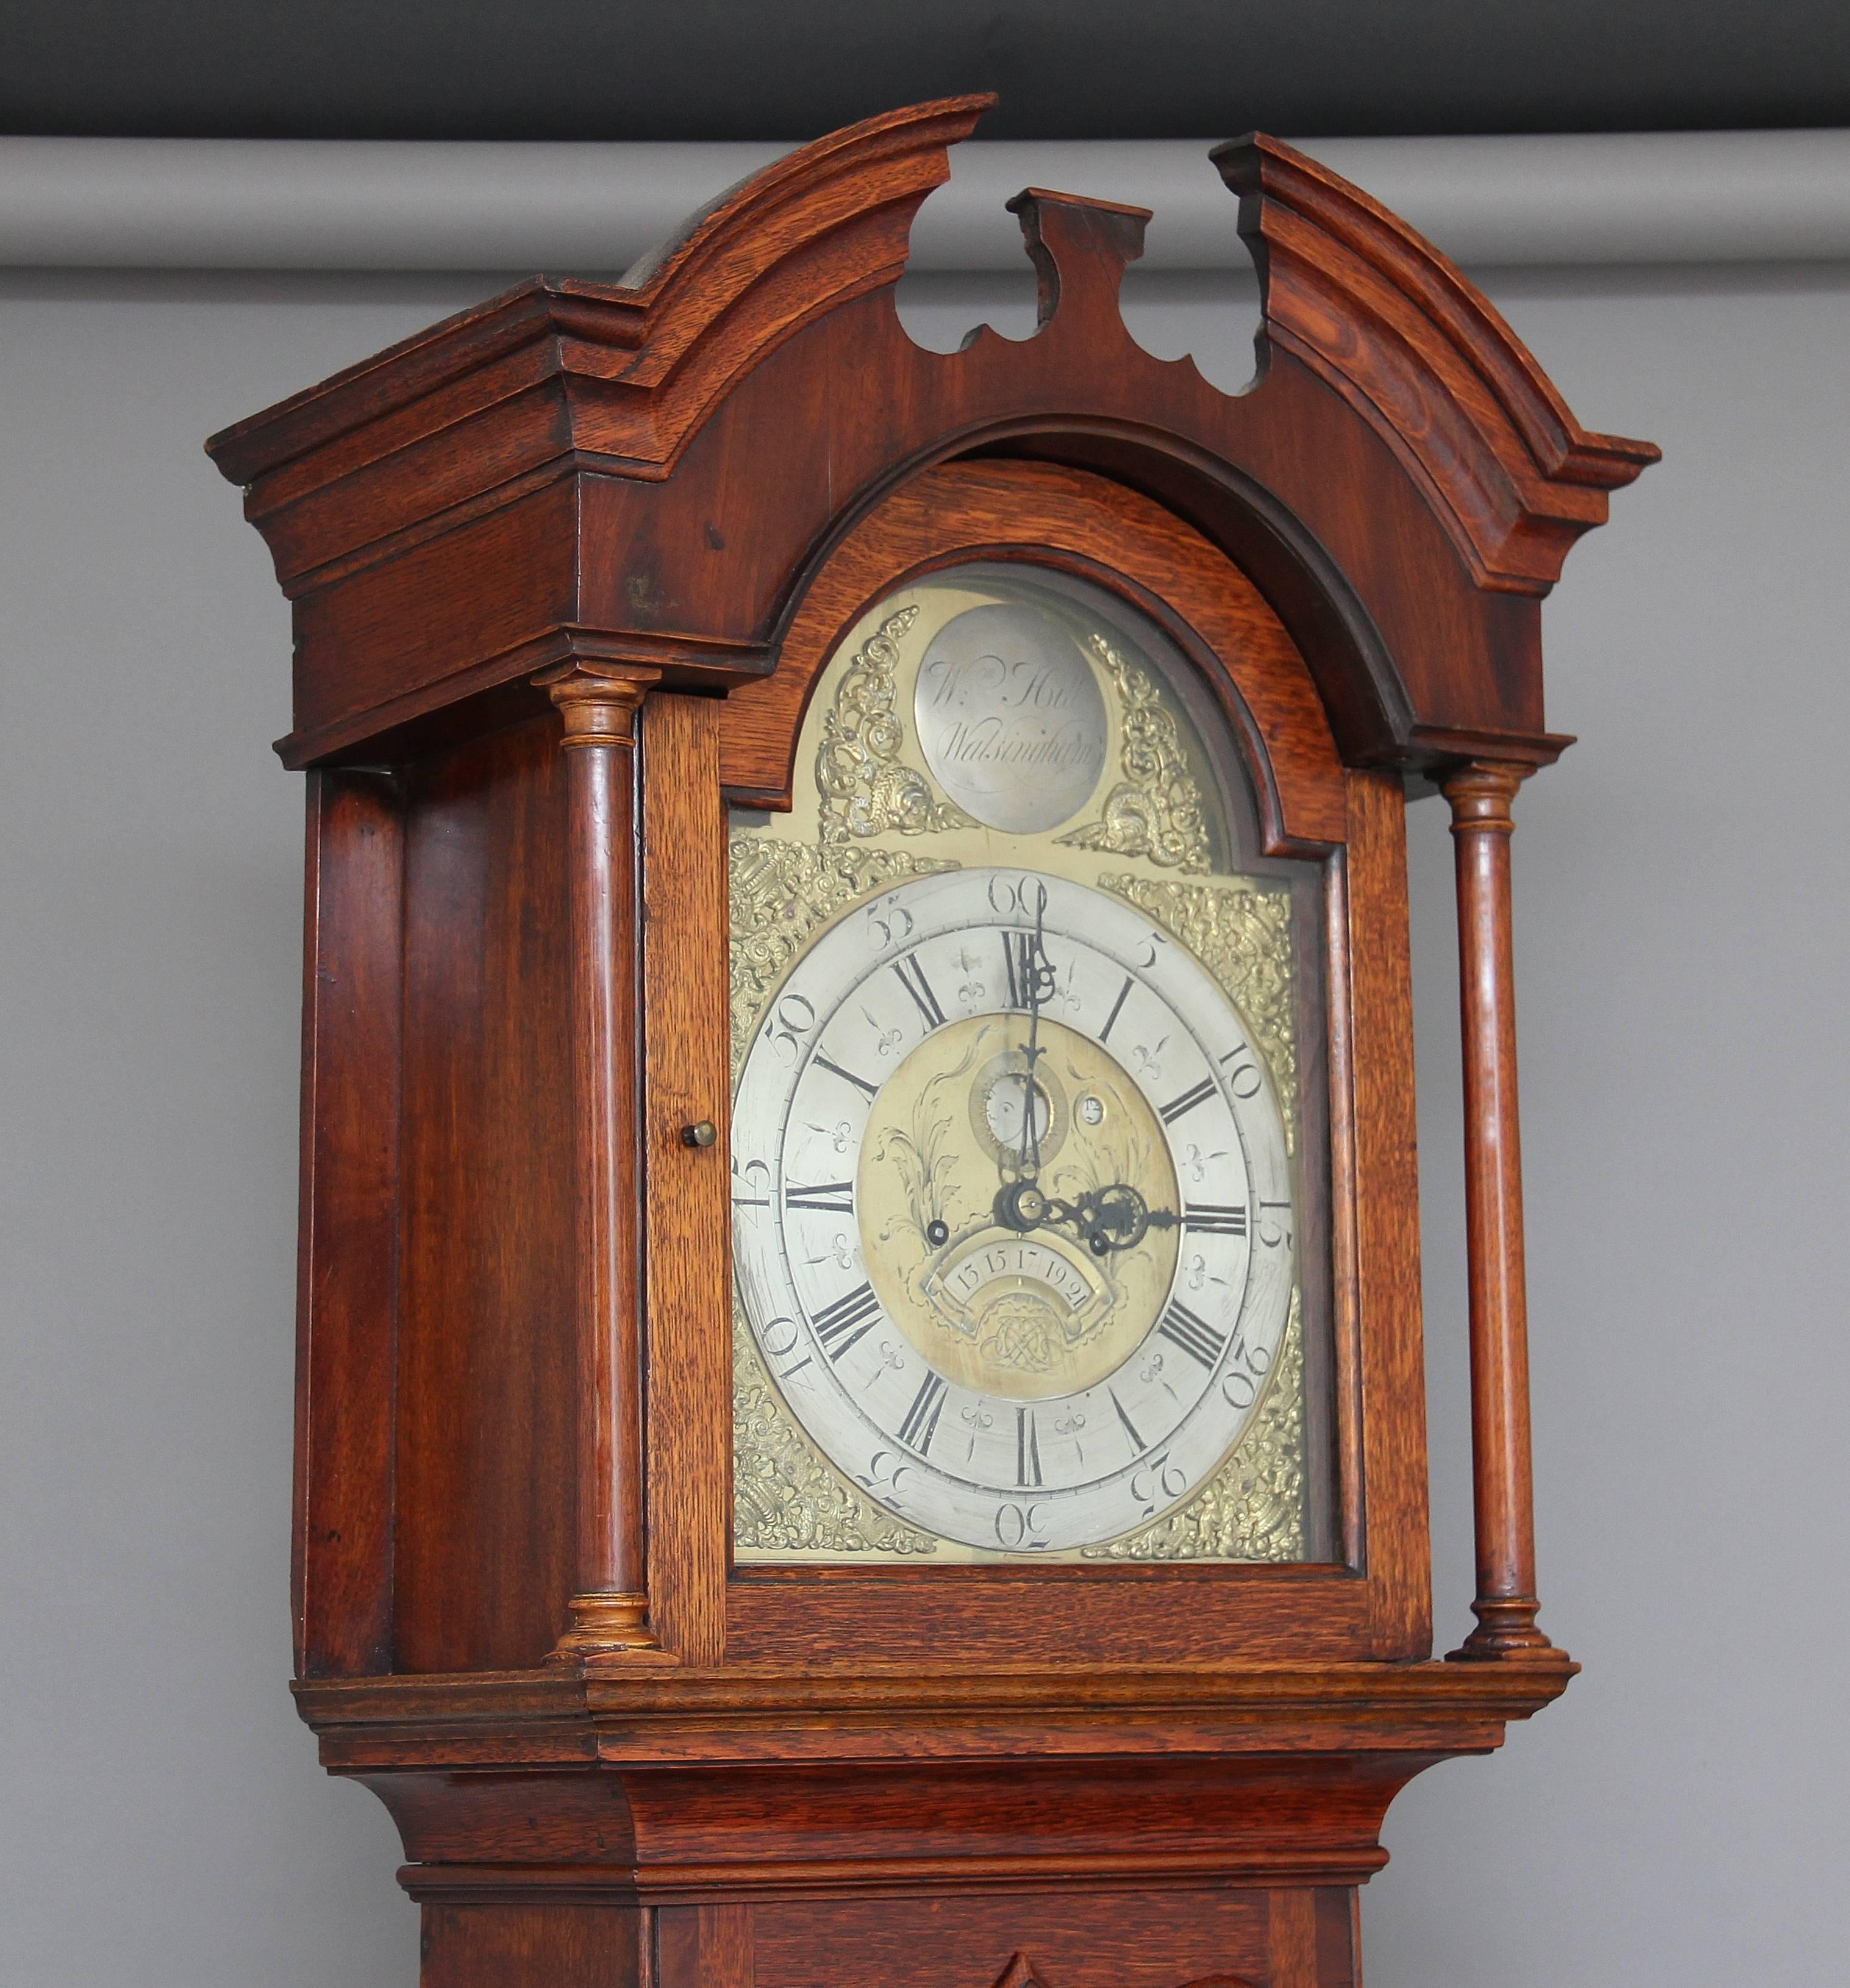 A very fine 18th Century oak eight day long case clock by William Hill of Walsingham (Norfolk), circa 1760. The brass dial of this clock is most interesting and features a “penny moon” where one would normally expect a seconds ring, a conventional